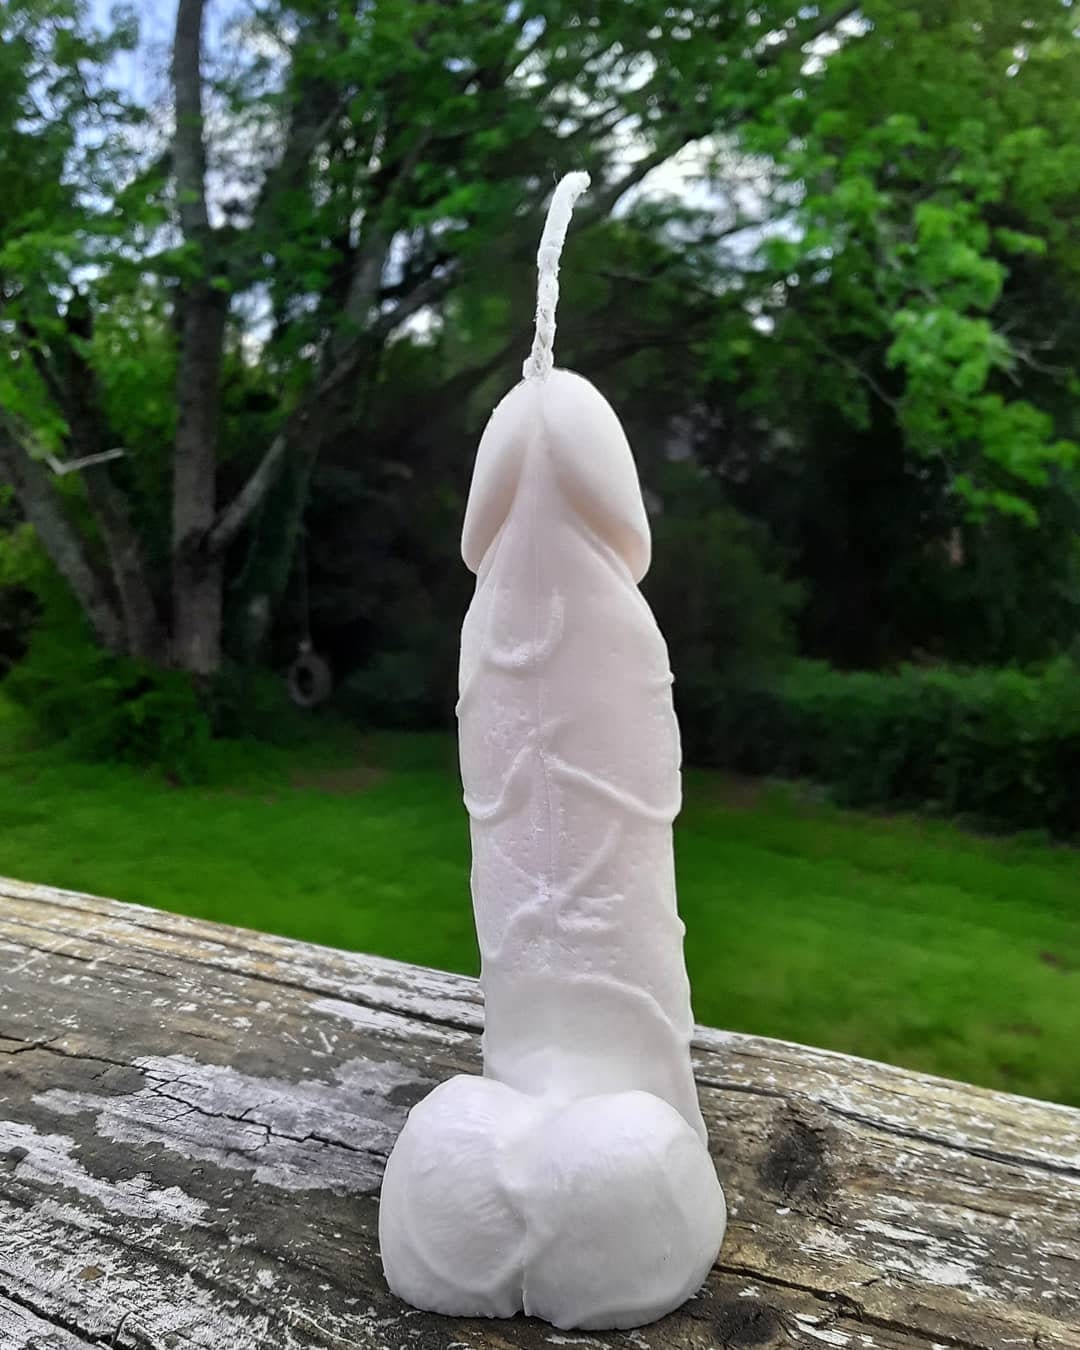 Male Genital Candle, Male Gender Candle, Penis Candle